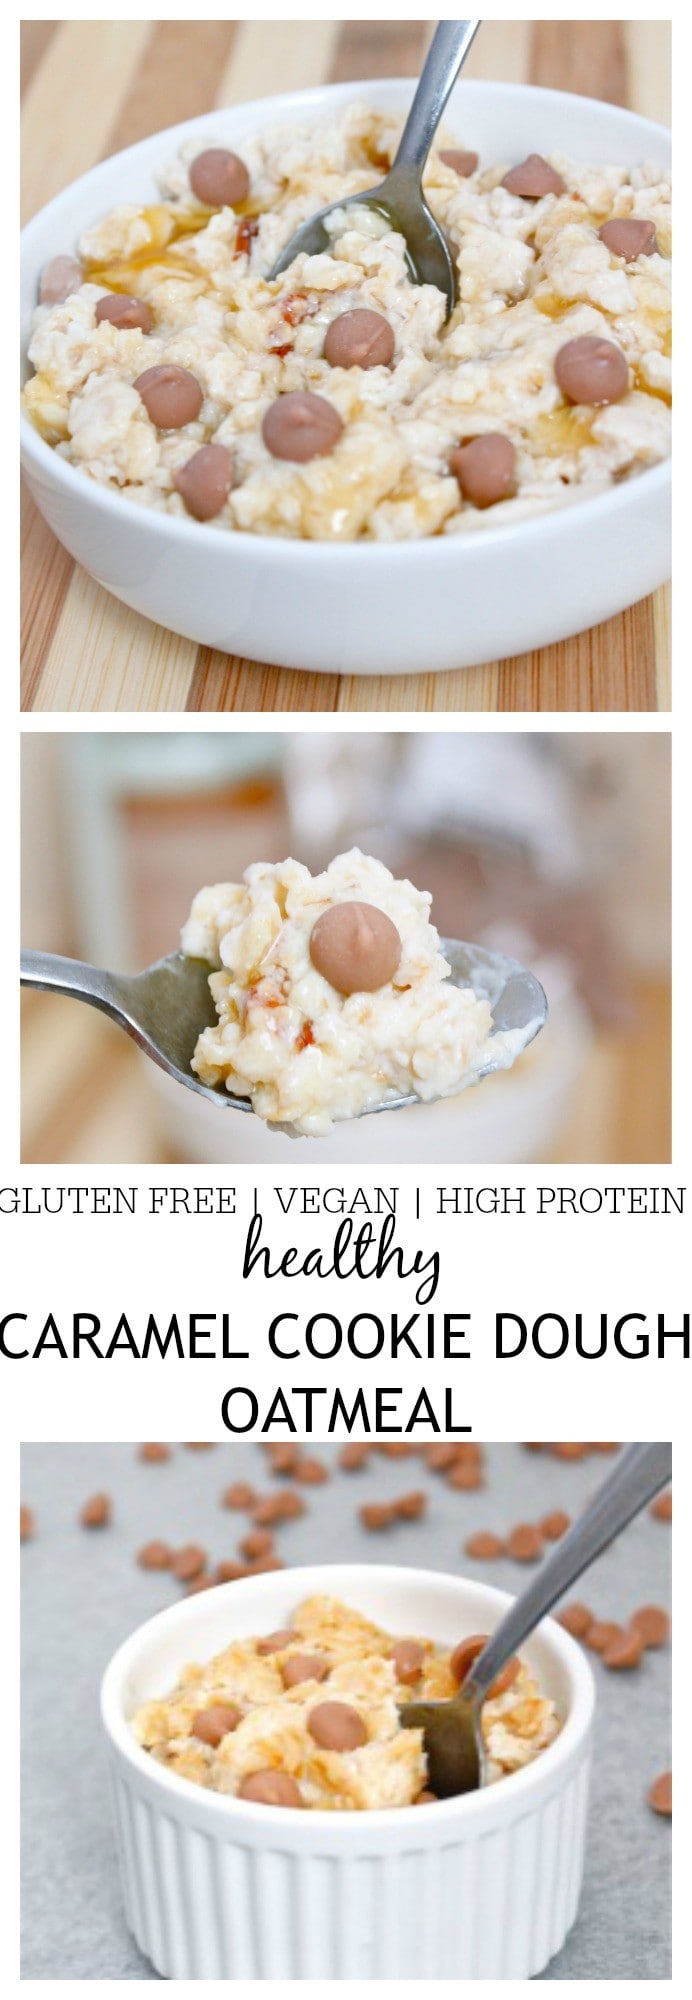 Healthy Caramel Cookie Dough Oatmeal- A healthy, high protein breakfast choice which tastes exactly like the dough of a caramel cookie- Gluten free, high in protein and a vegan option too! @thebigmansworld -thebigmansworld.com